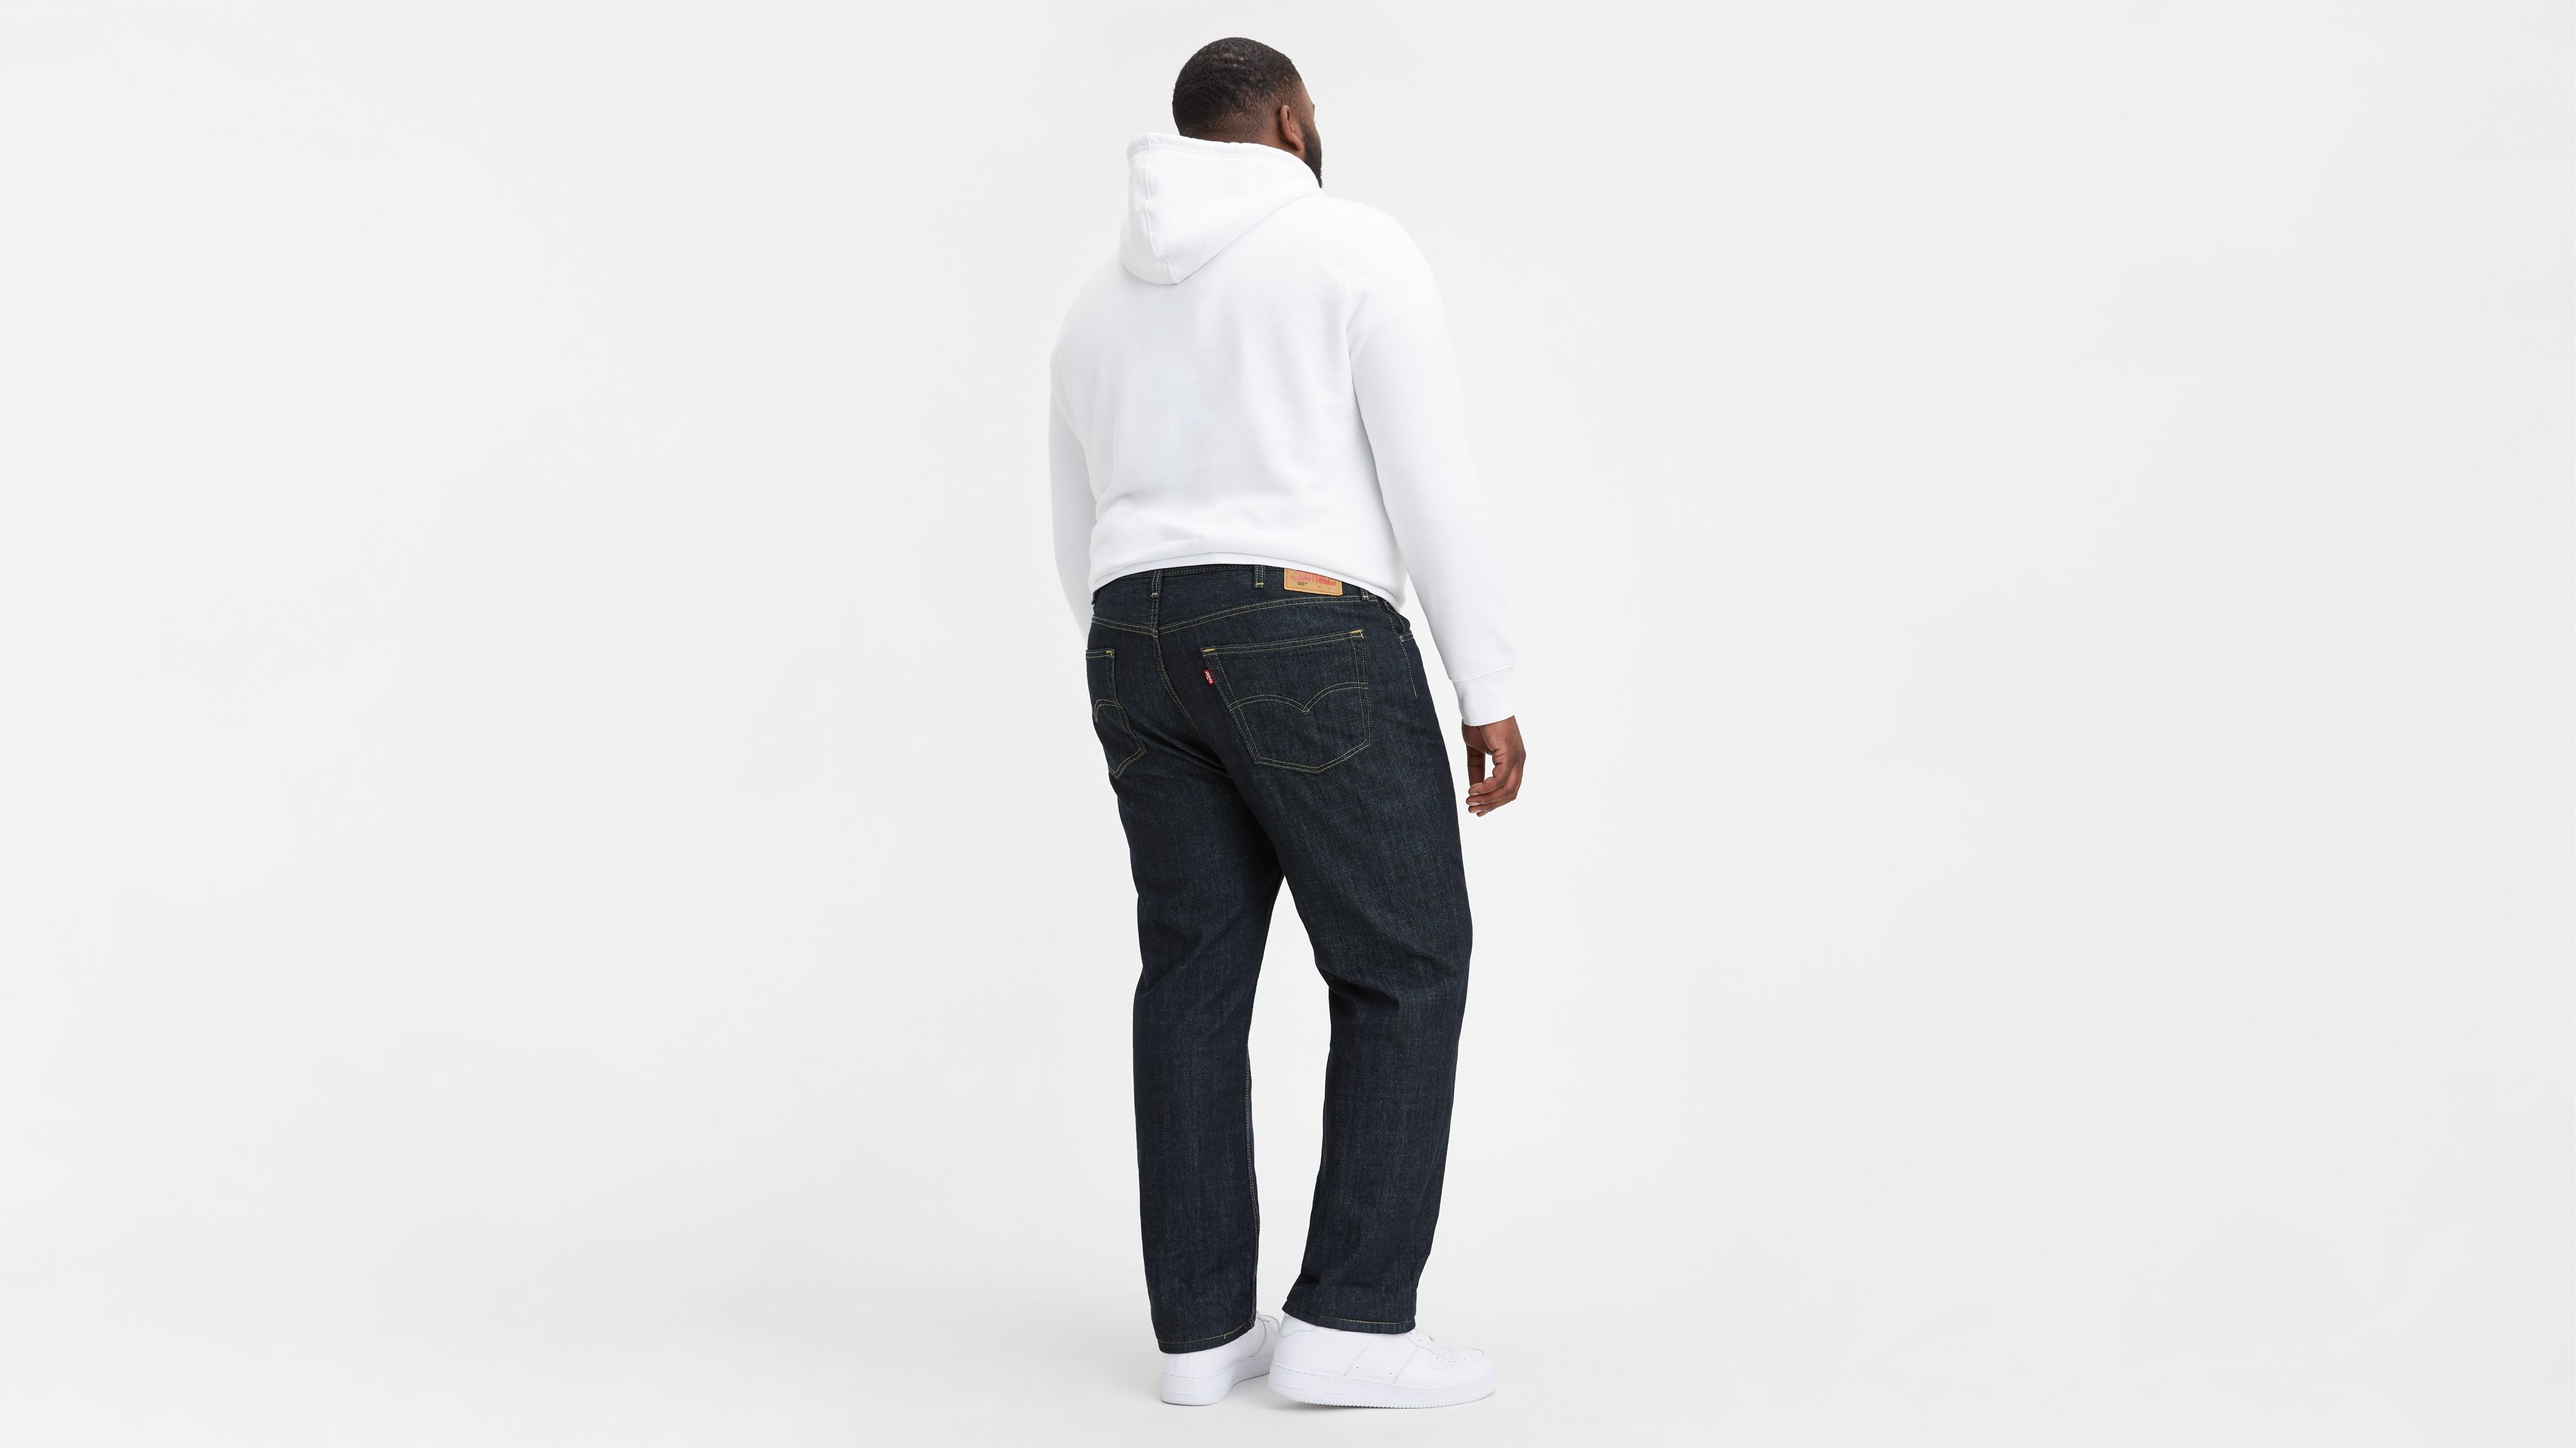 levis 559 big and tall